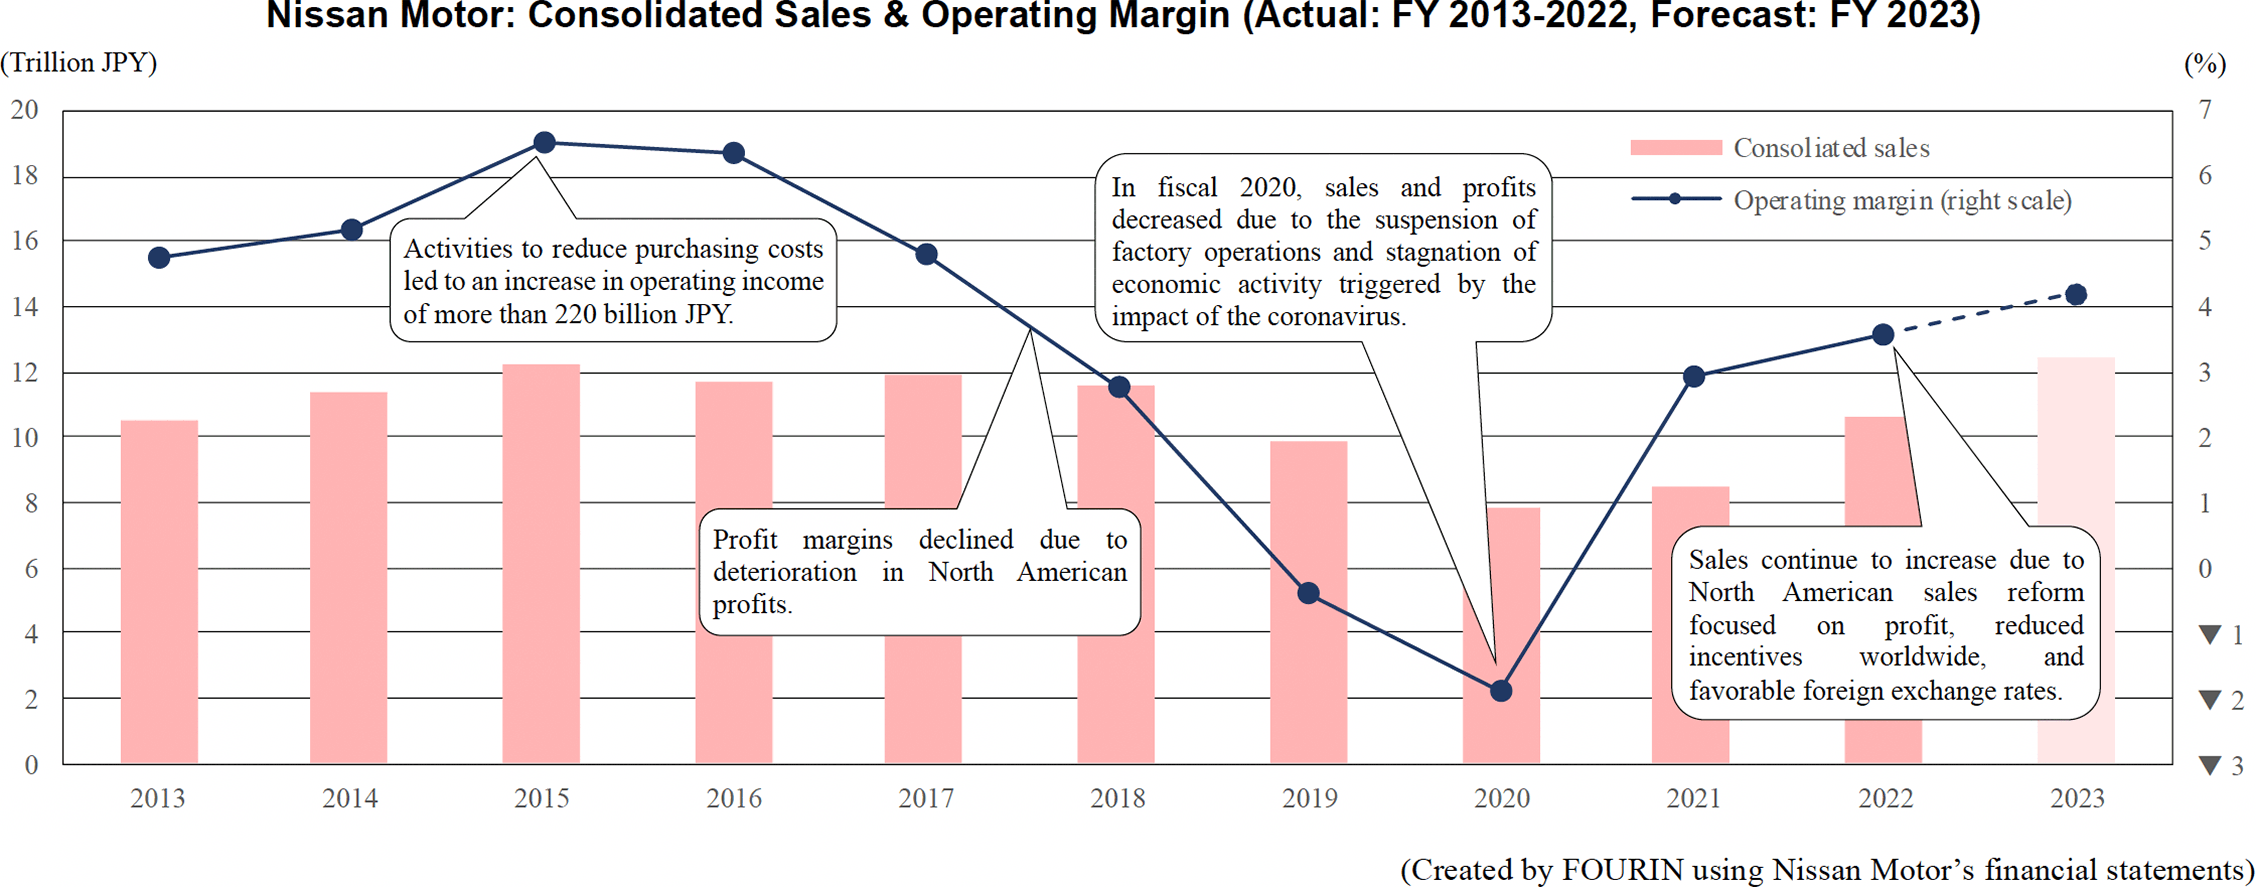 Graph: Nissan Motor: Consolidated Sales & Operating Margin (Actual: FY 2013-2022, Forecast: FY 2023)